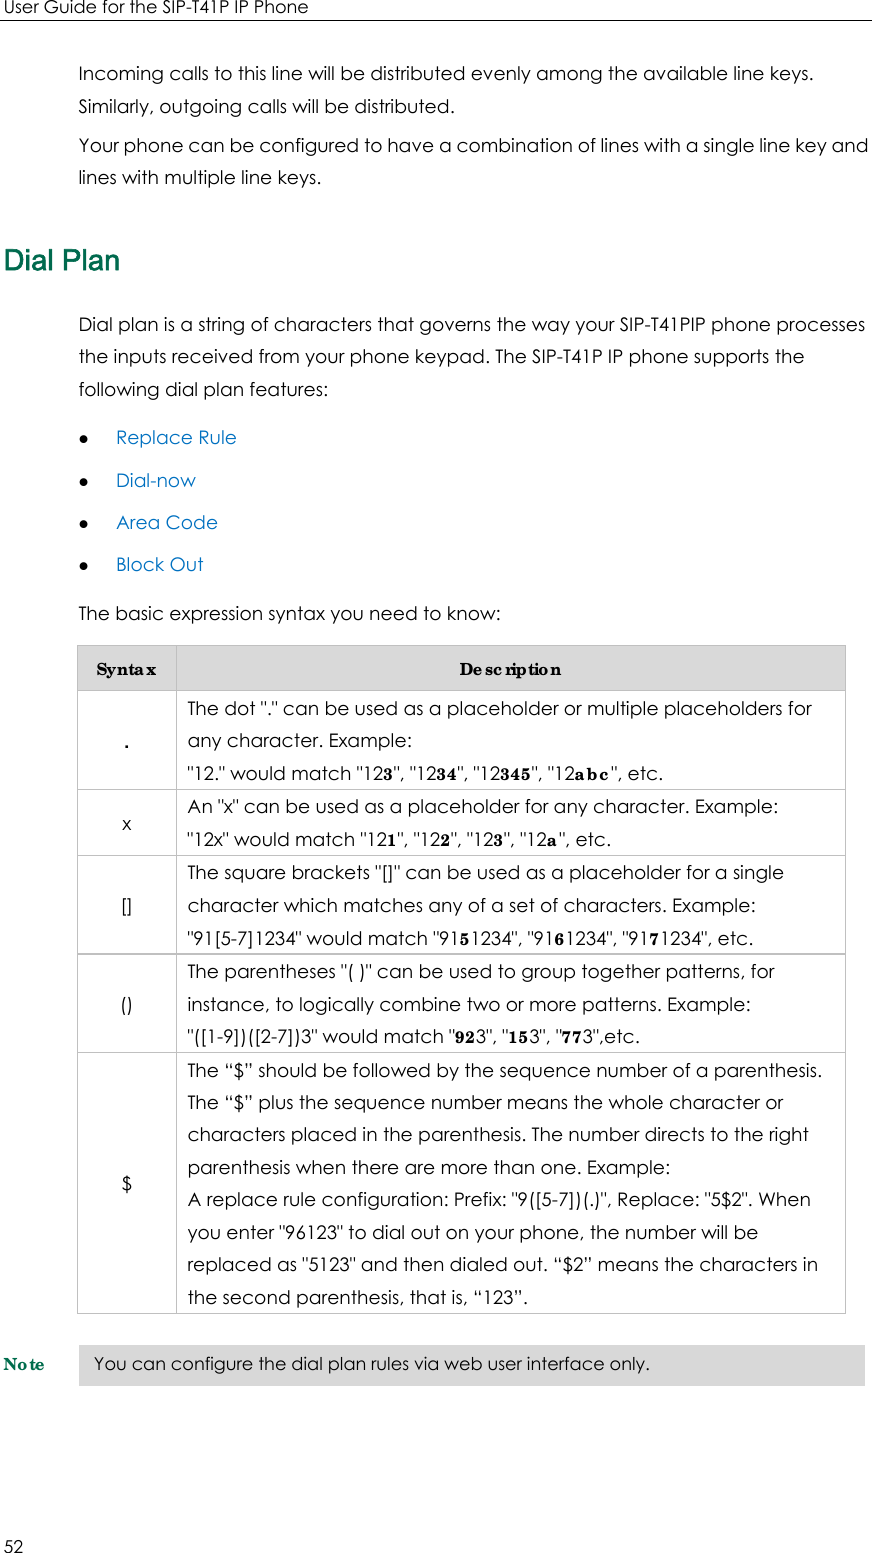 User Guide for the SIP-T41P IP Phone 52 Incoming calls to this line will be distributed evenly among the available line keys. Similarly, outgoing calls will be distributed. Your phone can be configured to have a combination of lines with a single line key and lines with multiple line keys. Dial Plan Dial plan is a string of characters that governs the way your SIP-T41PIP phone processes the inputs received from your phone keypad. The SIP-T41P IP phone supports the following dial plan features: z Replace Rule z Dial-now z Area Code z Block Out The basic expression syntax you need to know: Syntax  Description . The dot &quot;.&quot; can be used as a placeholder or multiple placeholders for any character. Example: &quot;12.&quot; would match &quot;123&quot;, &quot;1234&quot;, &quot;12345&quot;, &quot;12abc&quot;, etc. x  An &quot;x&quot; can be used as a placeholder for any character. Example: &quot;12x&quot; would match &quot;121&quot;, &quot;122&quot;, &quot;123&quot;, &quot;12a&quot;, etc. [] The square brackets &quot;[]&quot; can be used as a placeholder for a single character which matches any of a set of characters. Example: &quot;91[5-7]1234&quot; would match &quot;9151234&quot;, &quot;9161234&quot;, &quot;9171234&quot;, etc. () The parentheses &quot;( )&quot; can be used to group together patterns, for instance, to logically combine two or more patterns. Example: &quot;([1-9])([2-7])3&quot; would match &quot;923&quot;, &quot;153&quot;, &quot;773&quot;,etc. $ The “$” should be followed by the sequence number of a parenthesis. The “$” plus the sequence number means the whole character or characters placed in the parenthesis. The number directs to the right parenthesis when there are more than one. Example: A replace rule configuration: Prefix: &quot;9([5-7])(.)&quot;, Replace: &quot;5$2&quot;. When you enter &quot;96123&quot; to dial out on your phone, the number will be replaced as &quot;5123&quot; and then dialed out. “$2” means the characters in the second parenthesis, that is, “123”. Note  You can configure the dial plan rules via web user interface only. 